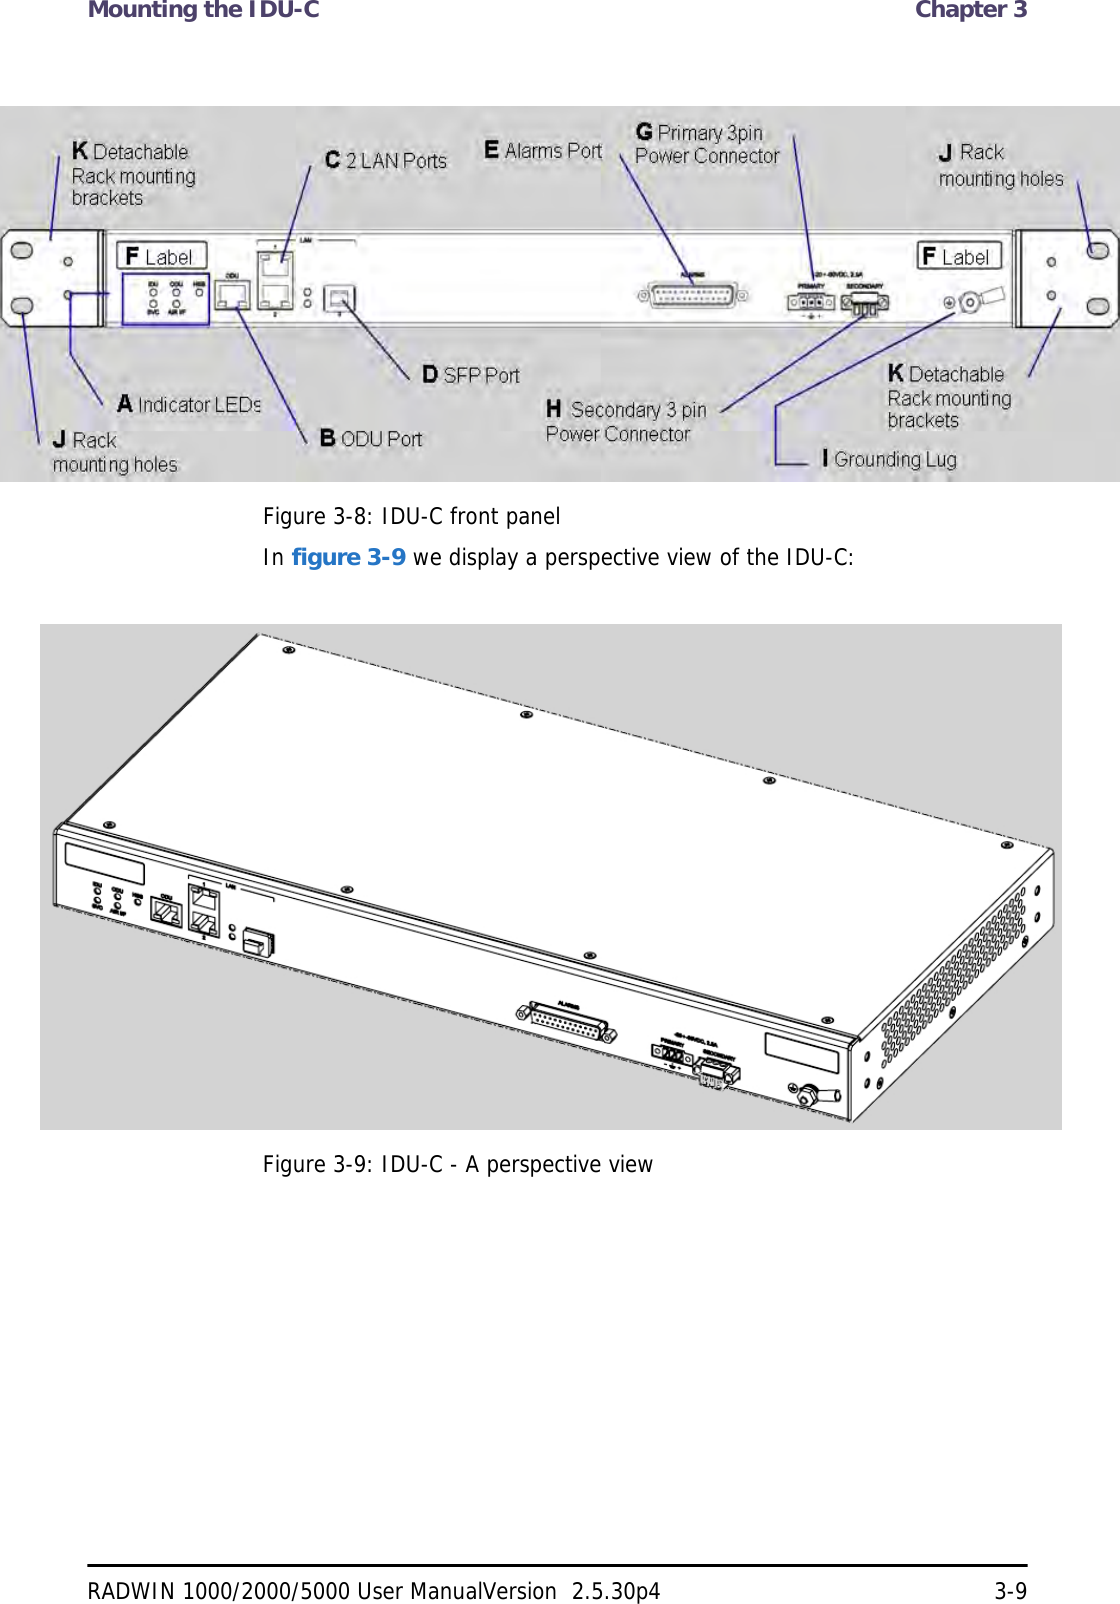 Mounting the IDU-C  Chapter 3RADWIN 1000/2000/5000 User ManualVersion  2.5.30p4 3-9Figure 3-8: IDU-C front panelIn figure 3-9 we display a perspective view of the IDU-C:Figure 3-9: IDU-C - A perspective view